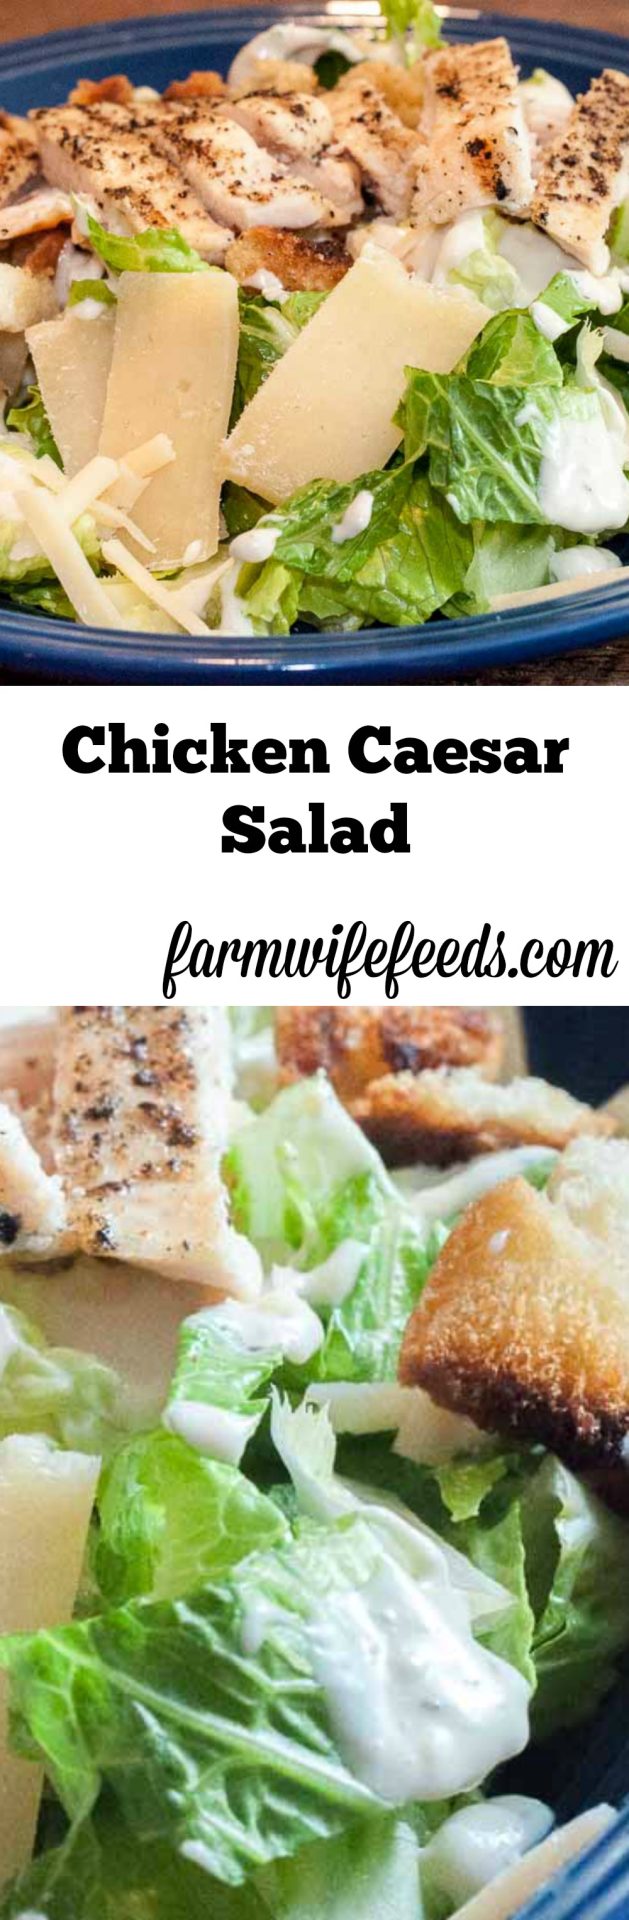 Grilled Chicken Caesar Salad with Homemade Croutons from Farmwife Feeds #chicken #salad #recipe #easy